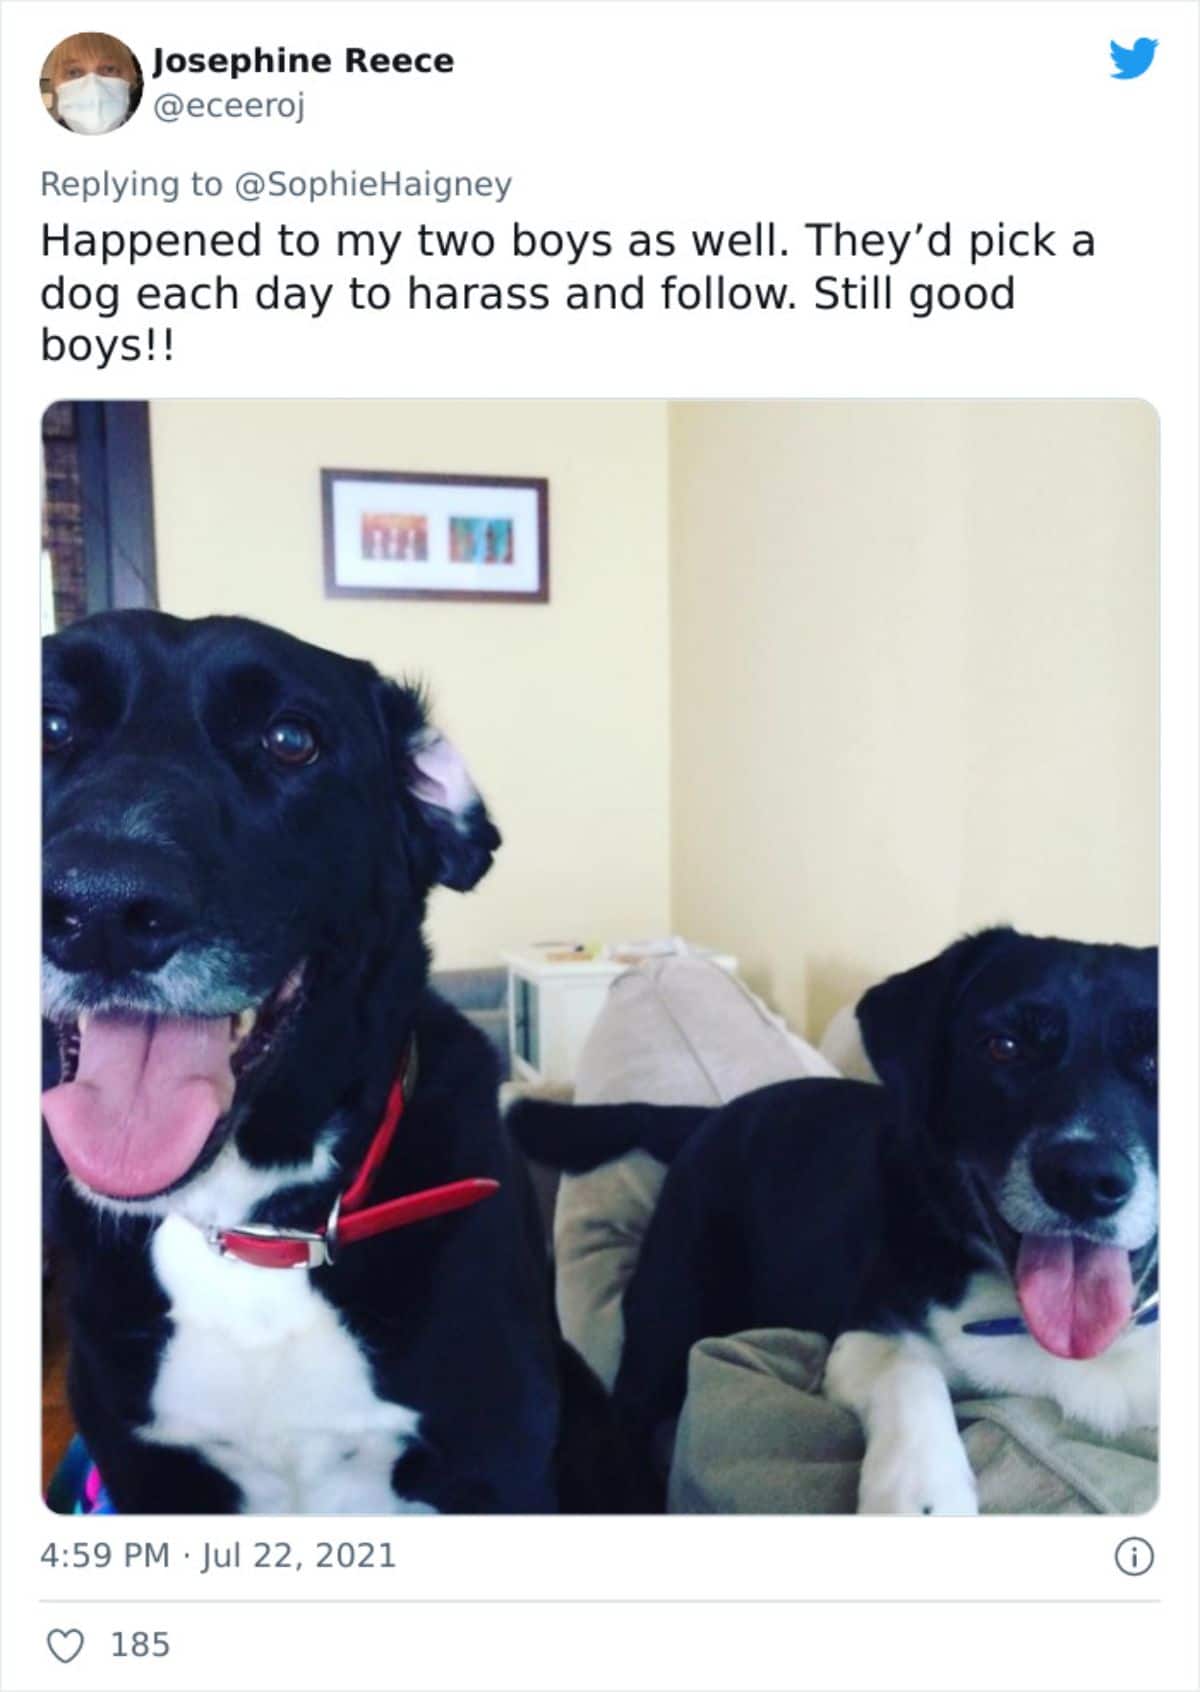 a tweet with a photo of 2 black and white dogs saying they got kicked out because he picked a dog every day to harass